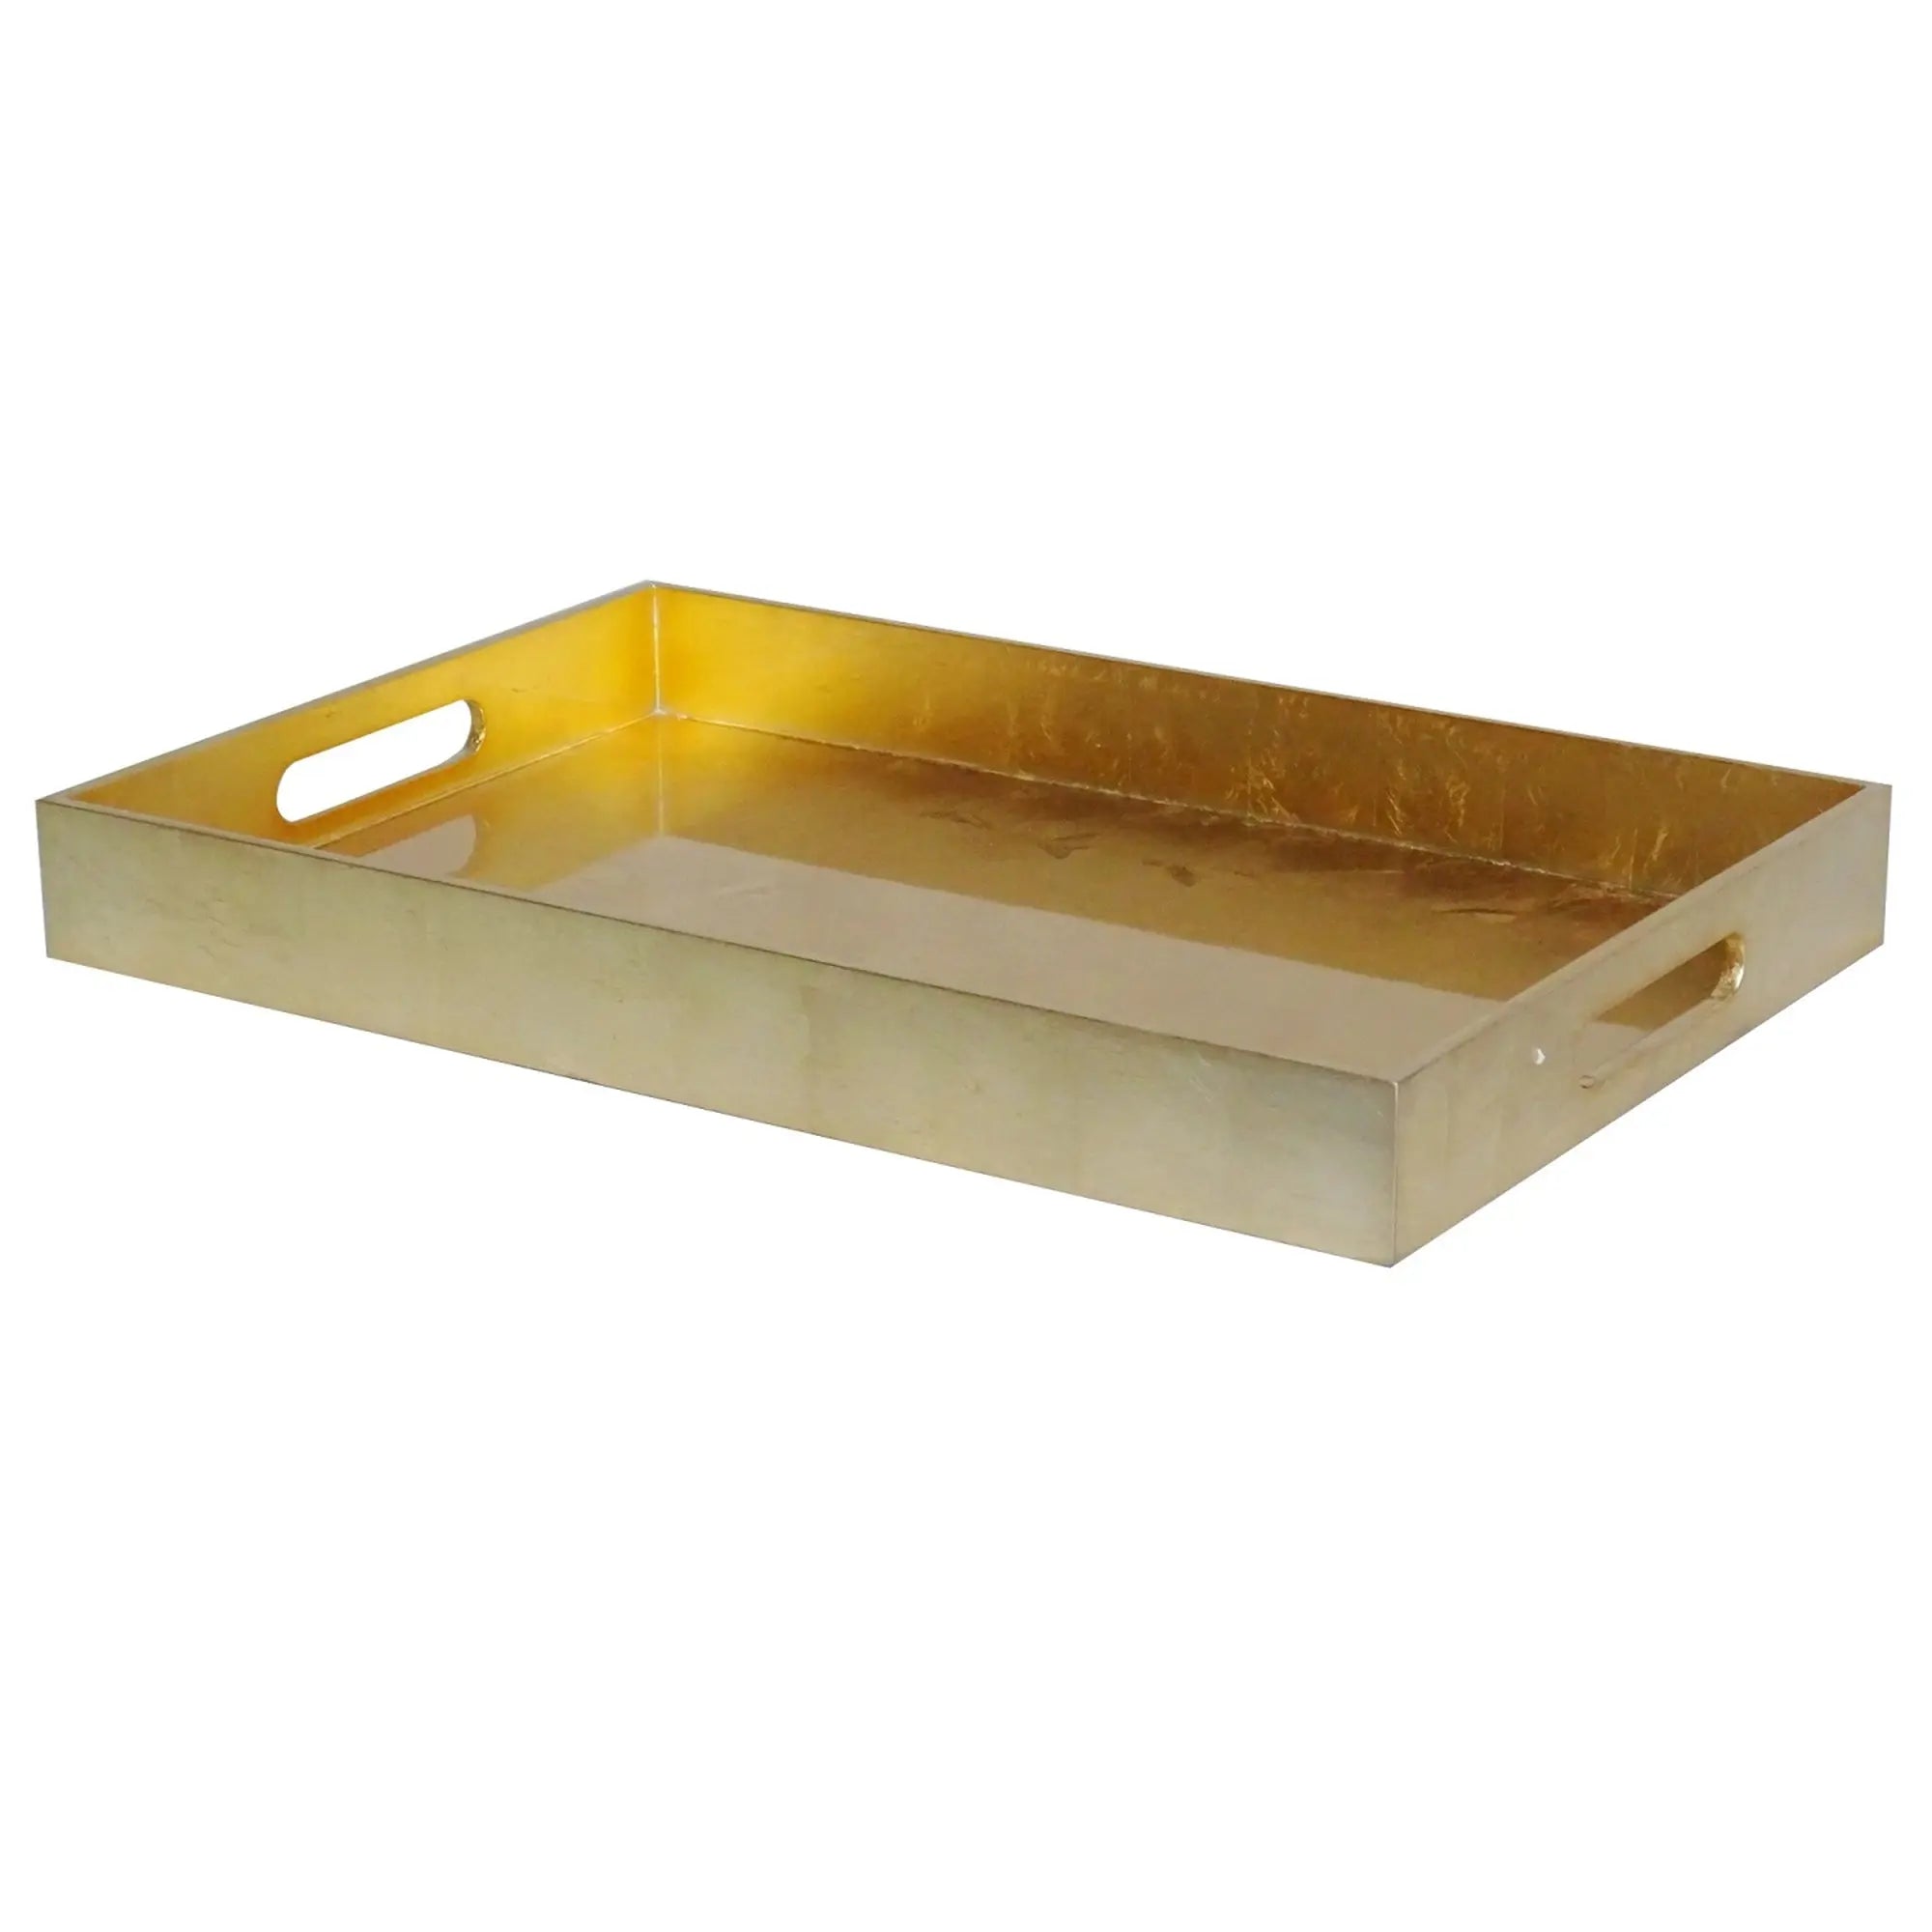 Gold Leaf Lacquer Rectangular Serving Trays - Home Smith